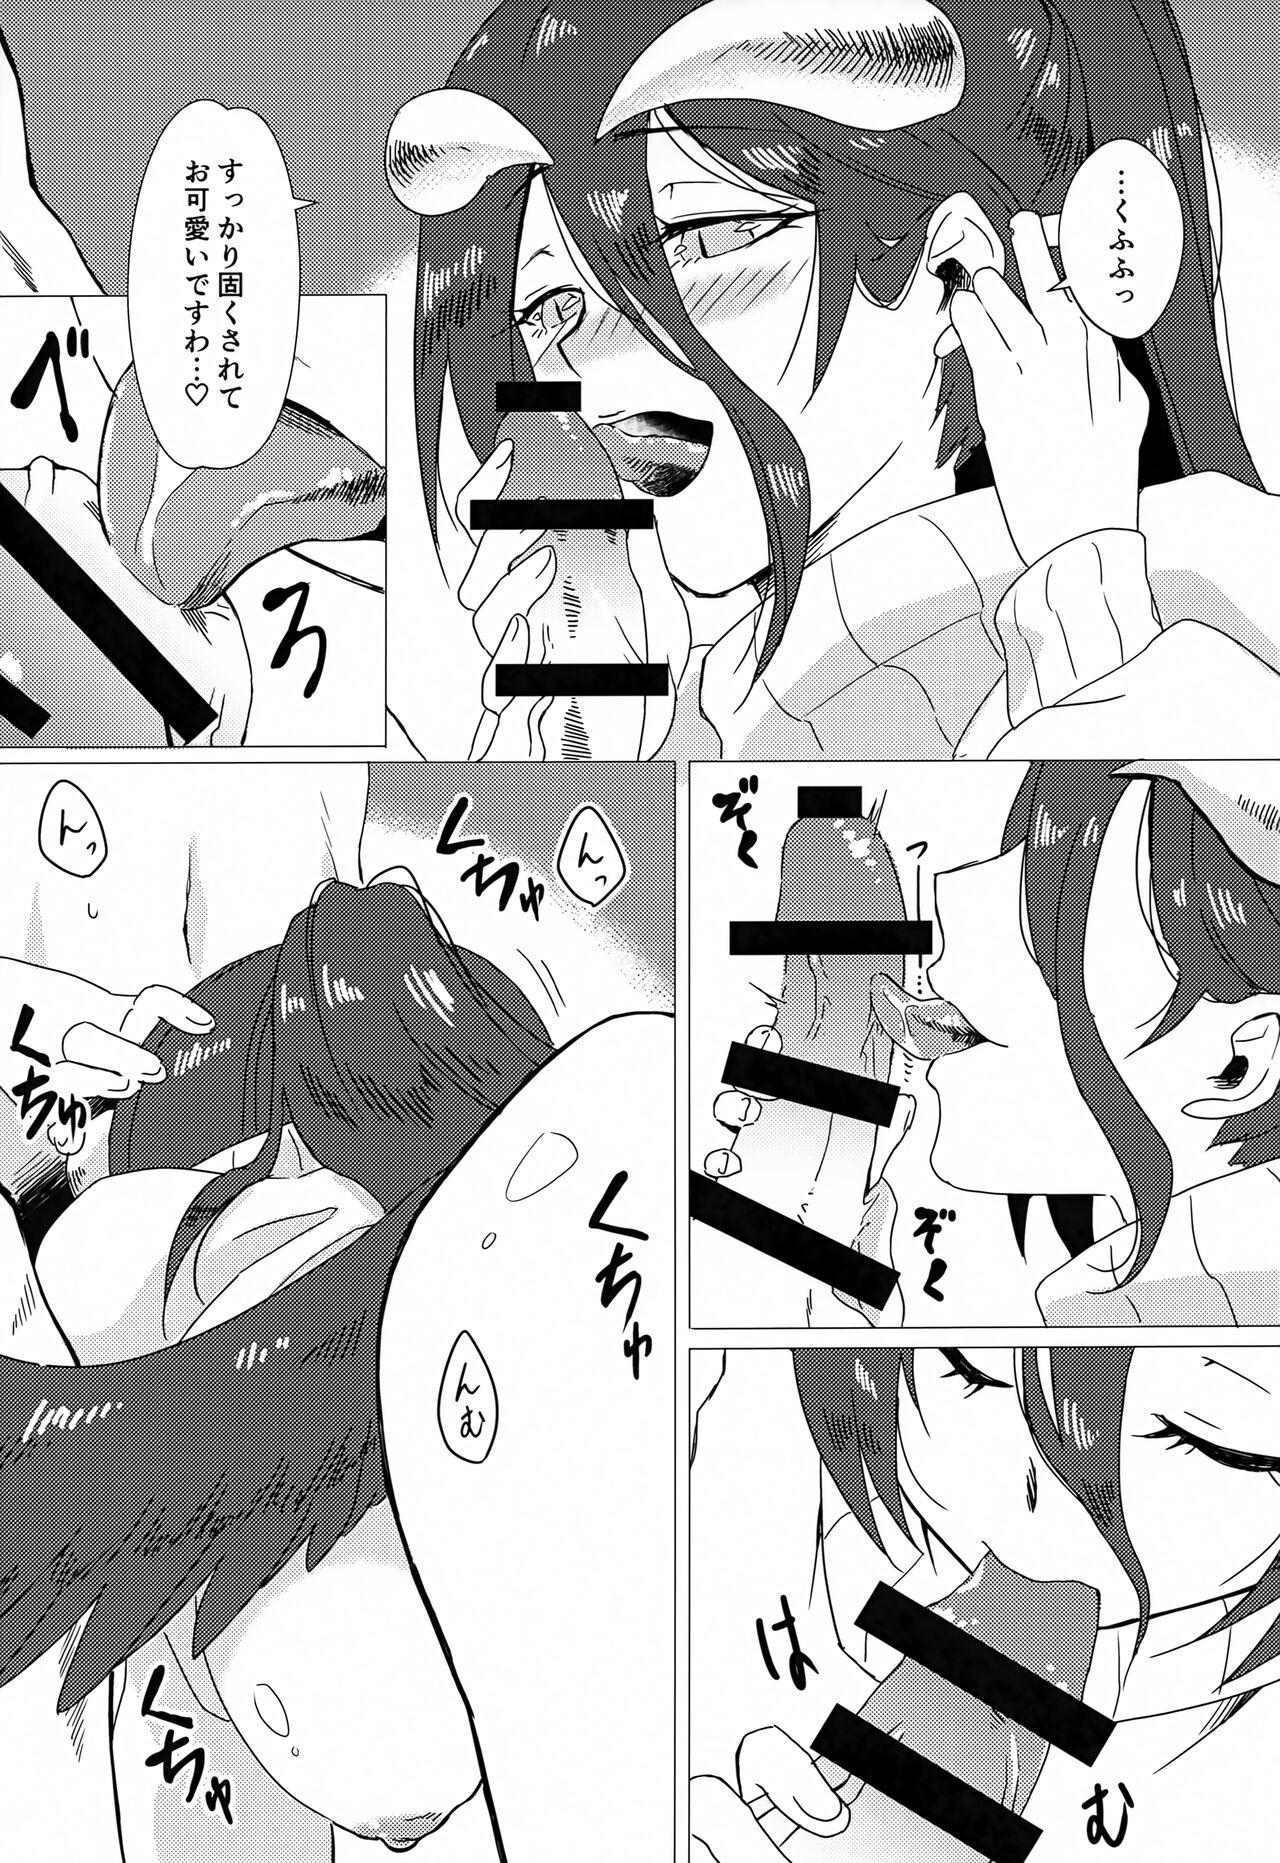 Strap On Albedo-san to! 2 - Overlord Long Hair - Page 10